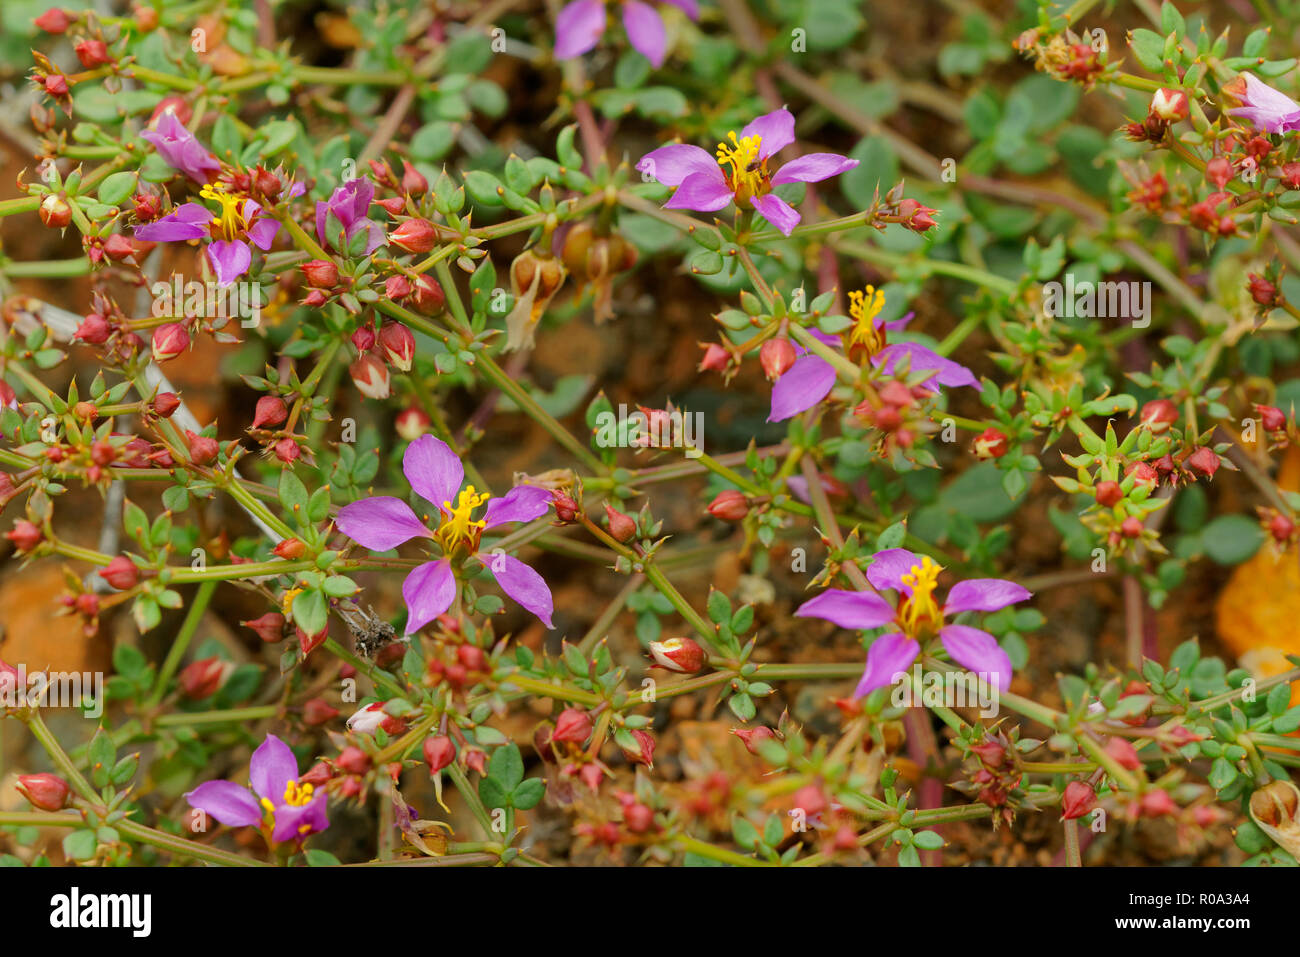 Fagonia Chilensis, an endemic plant from northern Chile, grows during the spring period Stock Photo